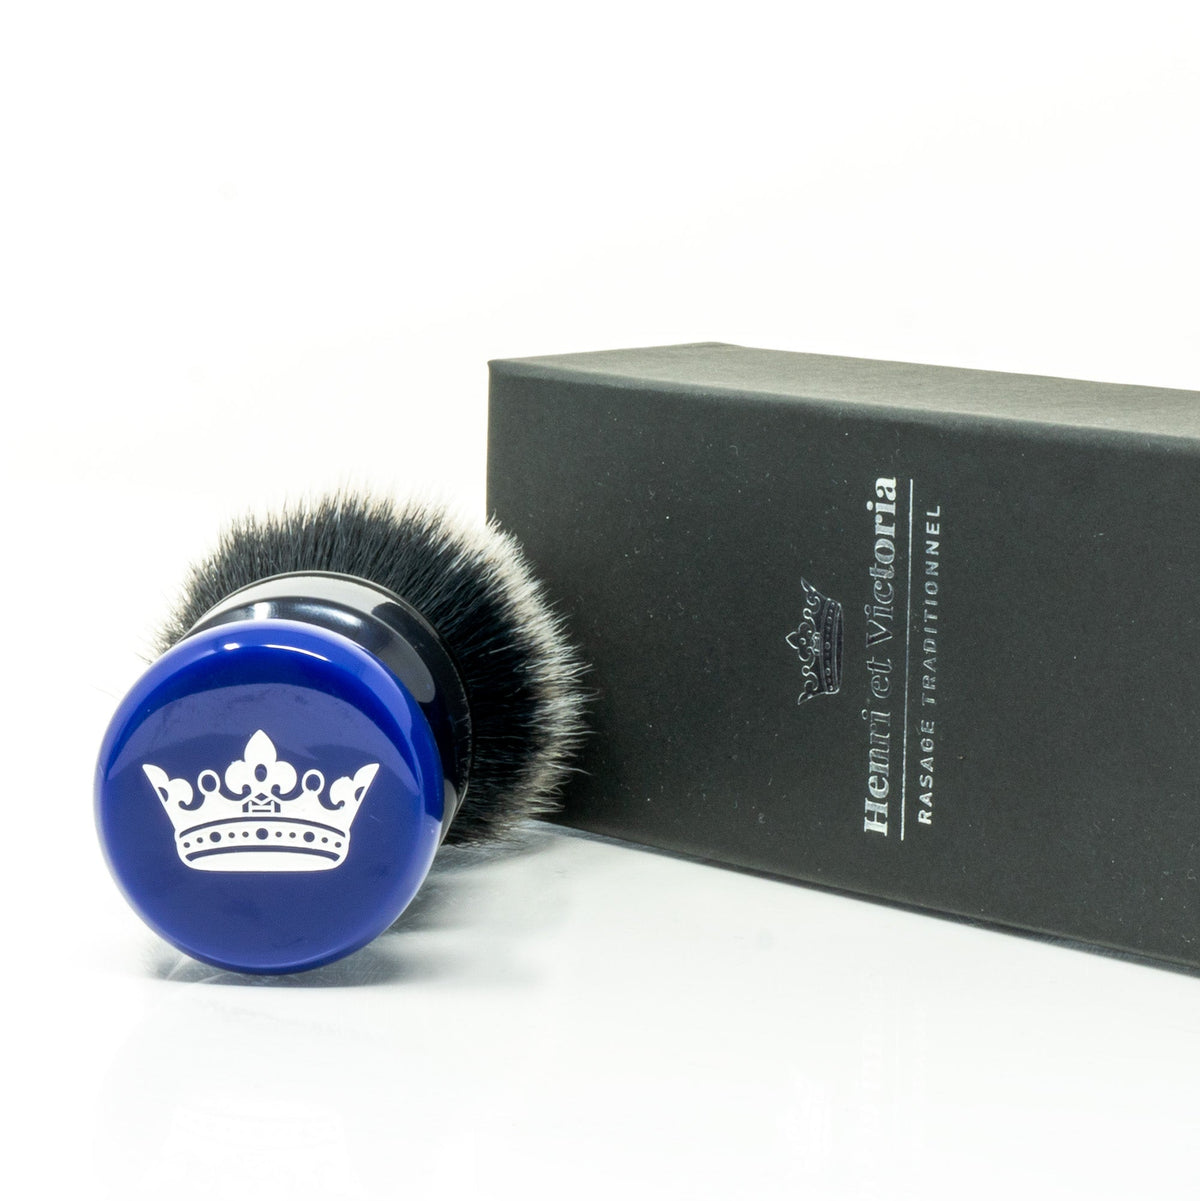 The Crown Synthetic Shaving Brush